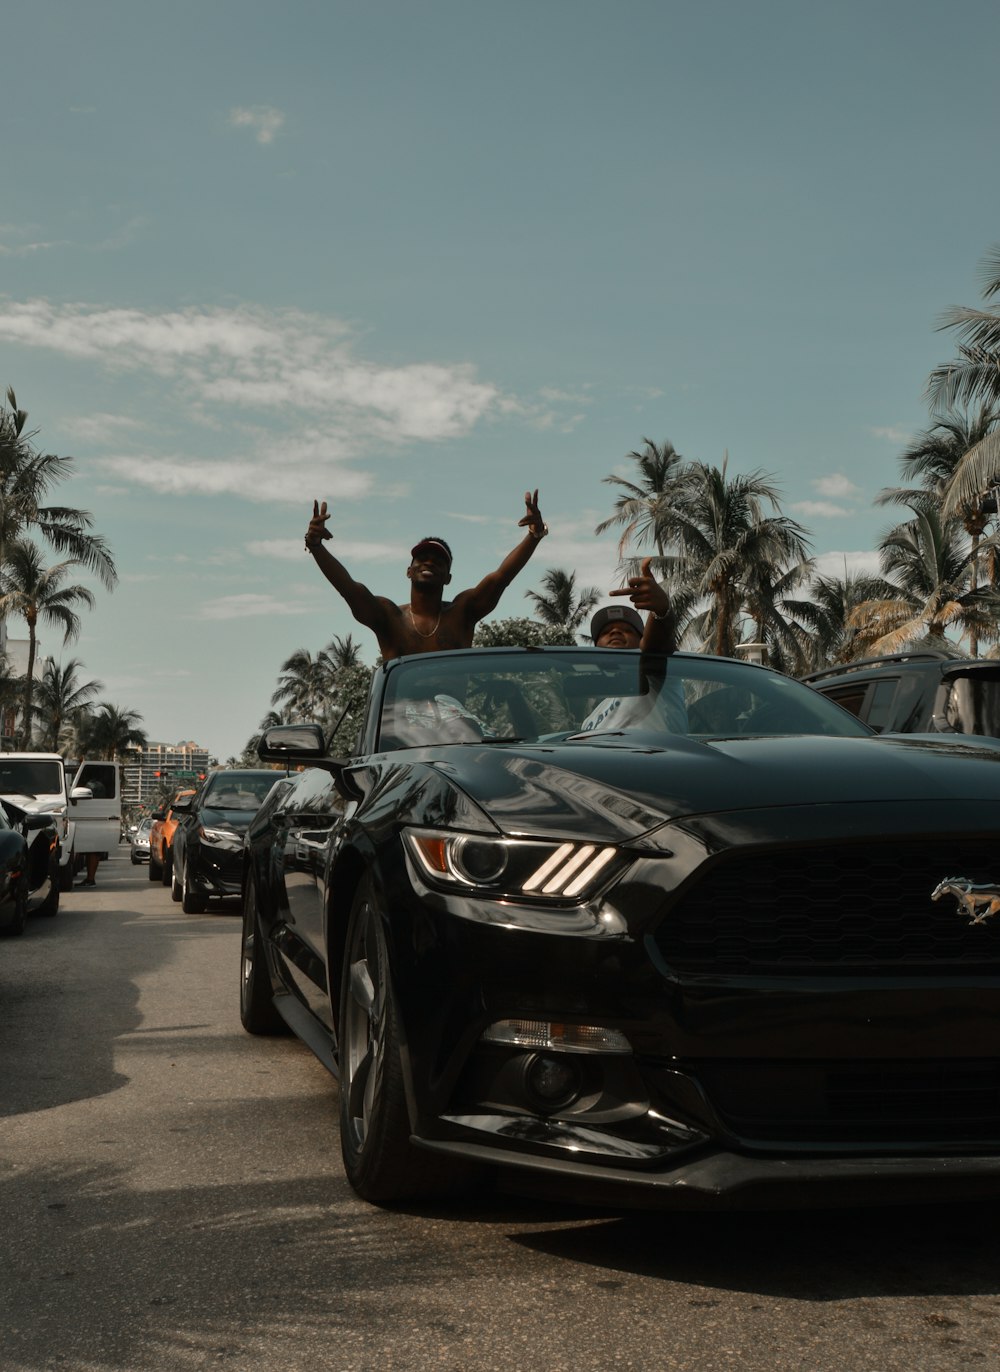 two men waving from the top of a black car